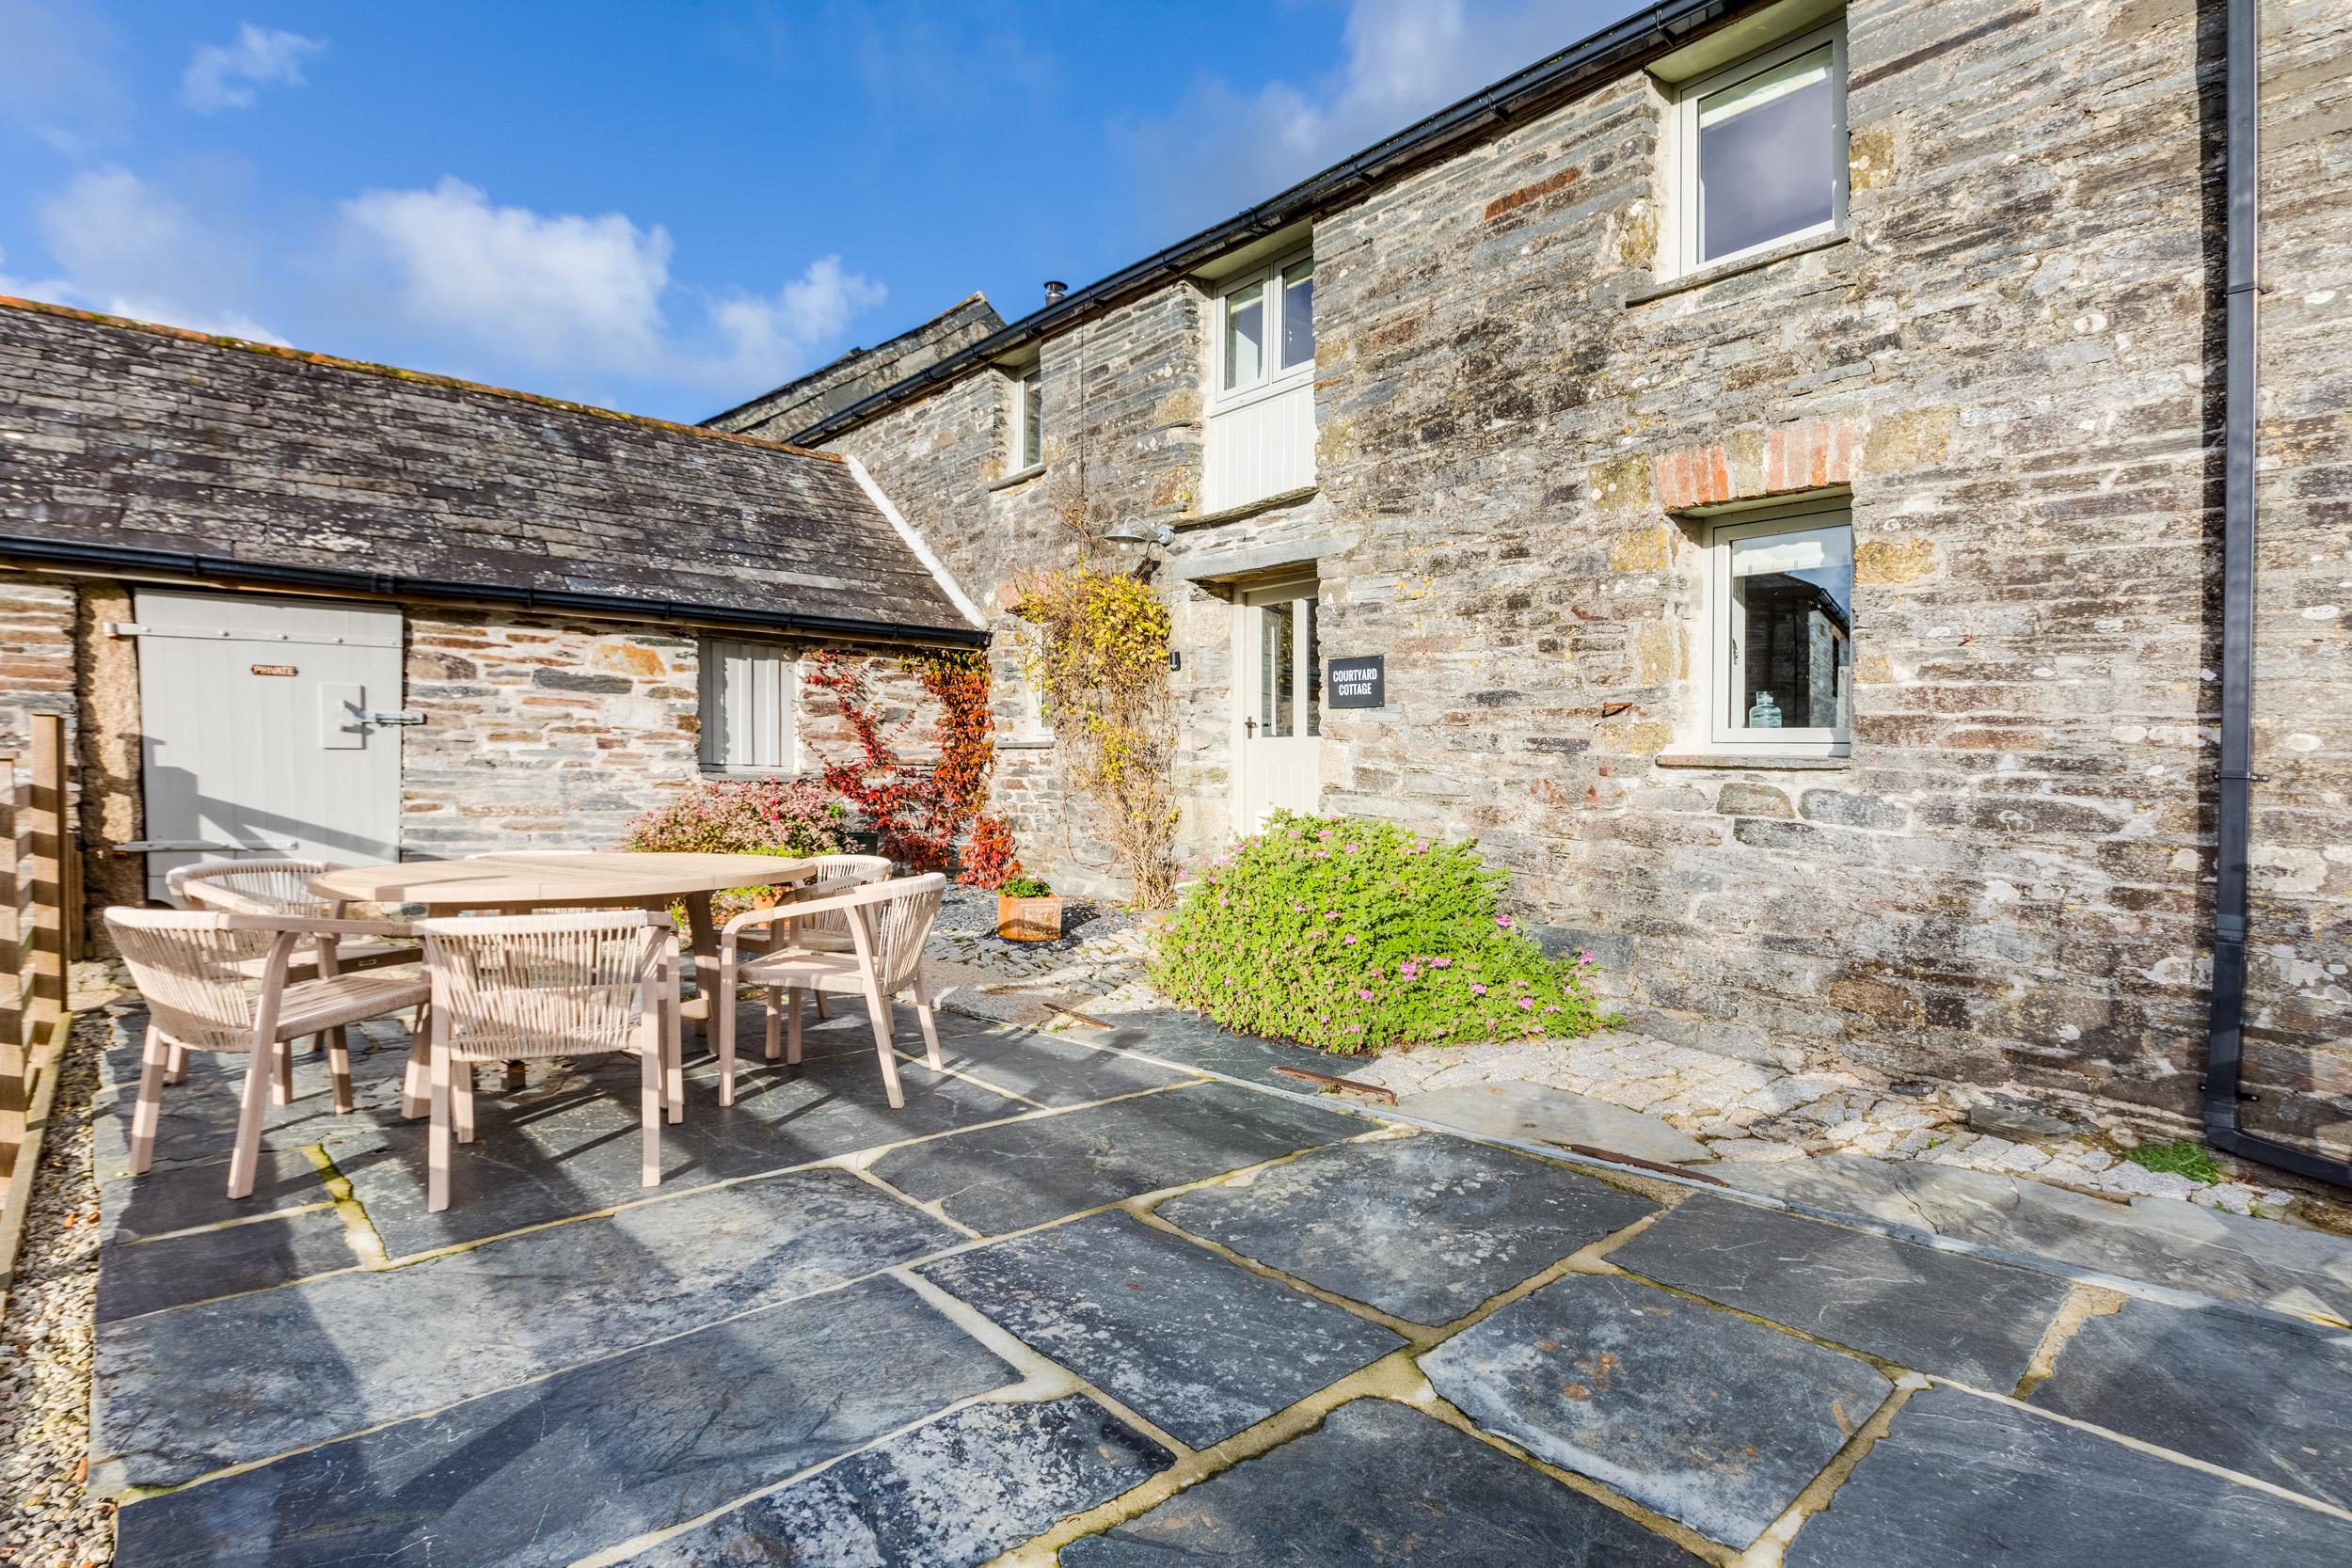 Courtyard Cottage - within the Helland Barton Farm collection